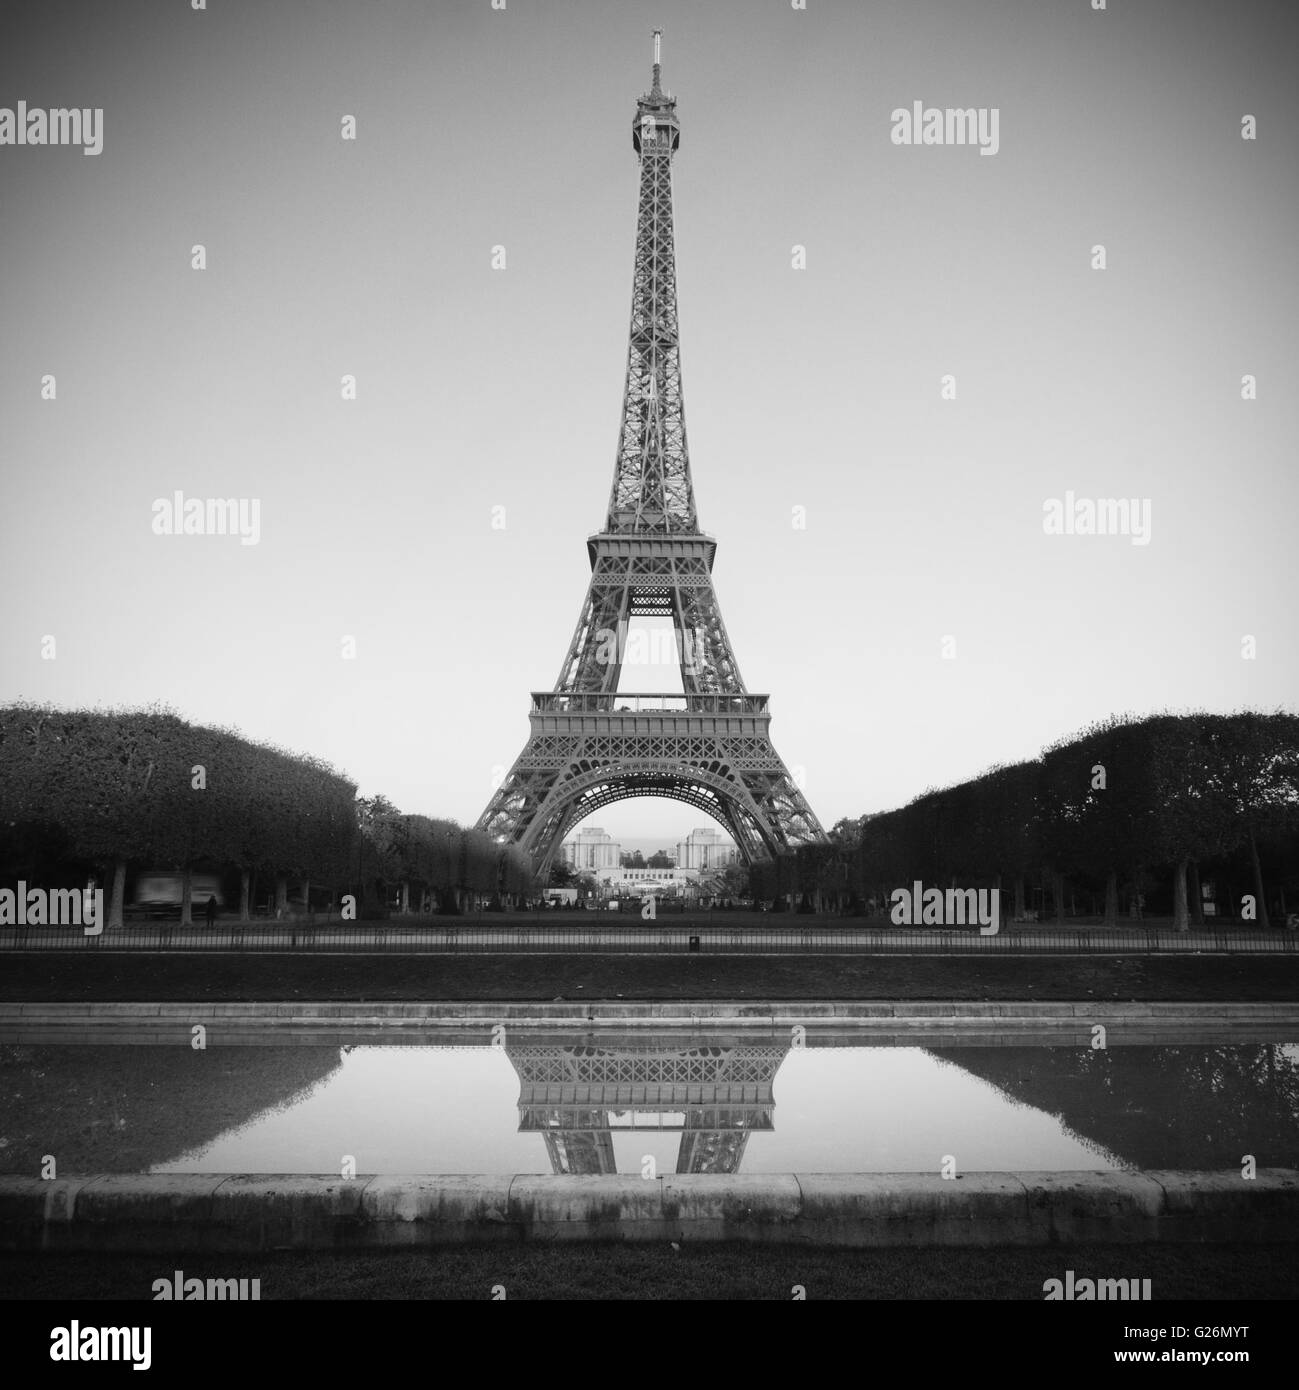 Eiffel Tower in Paris - black and white Stock Photo